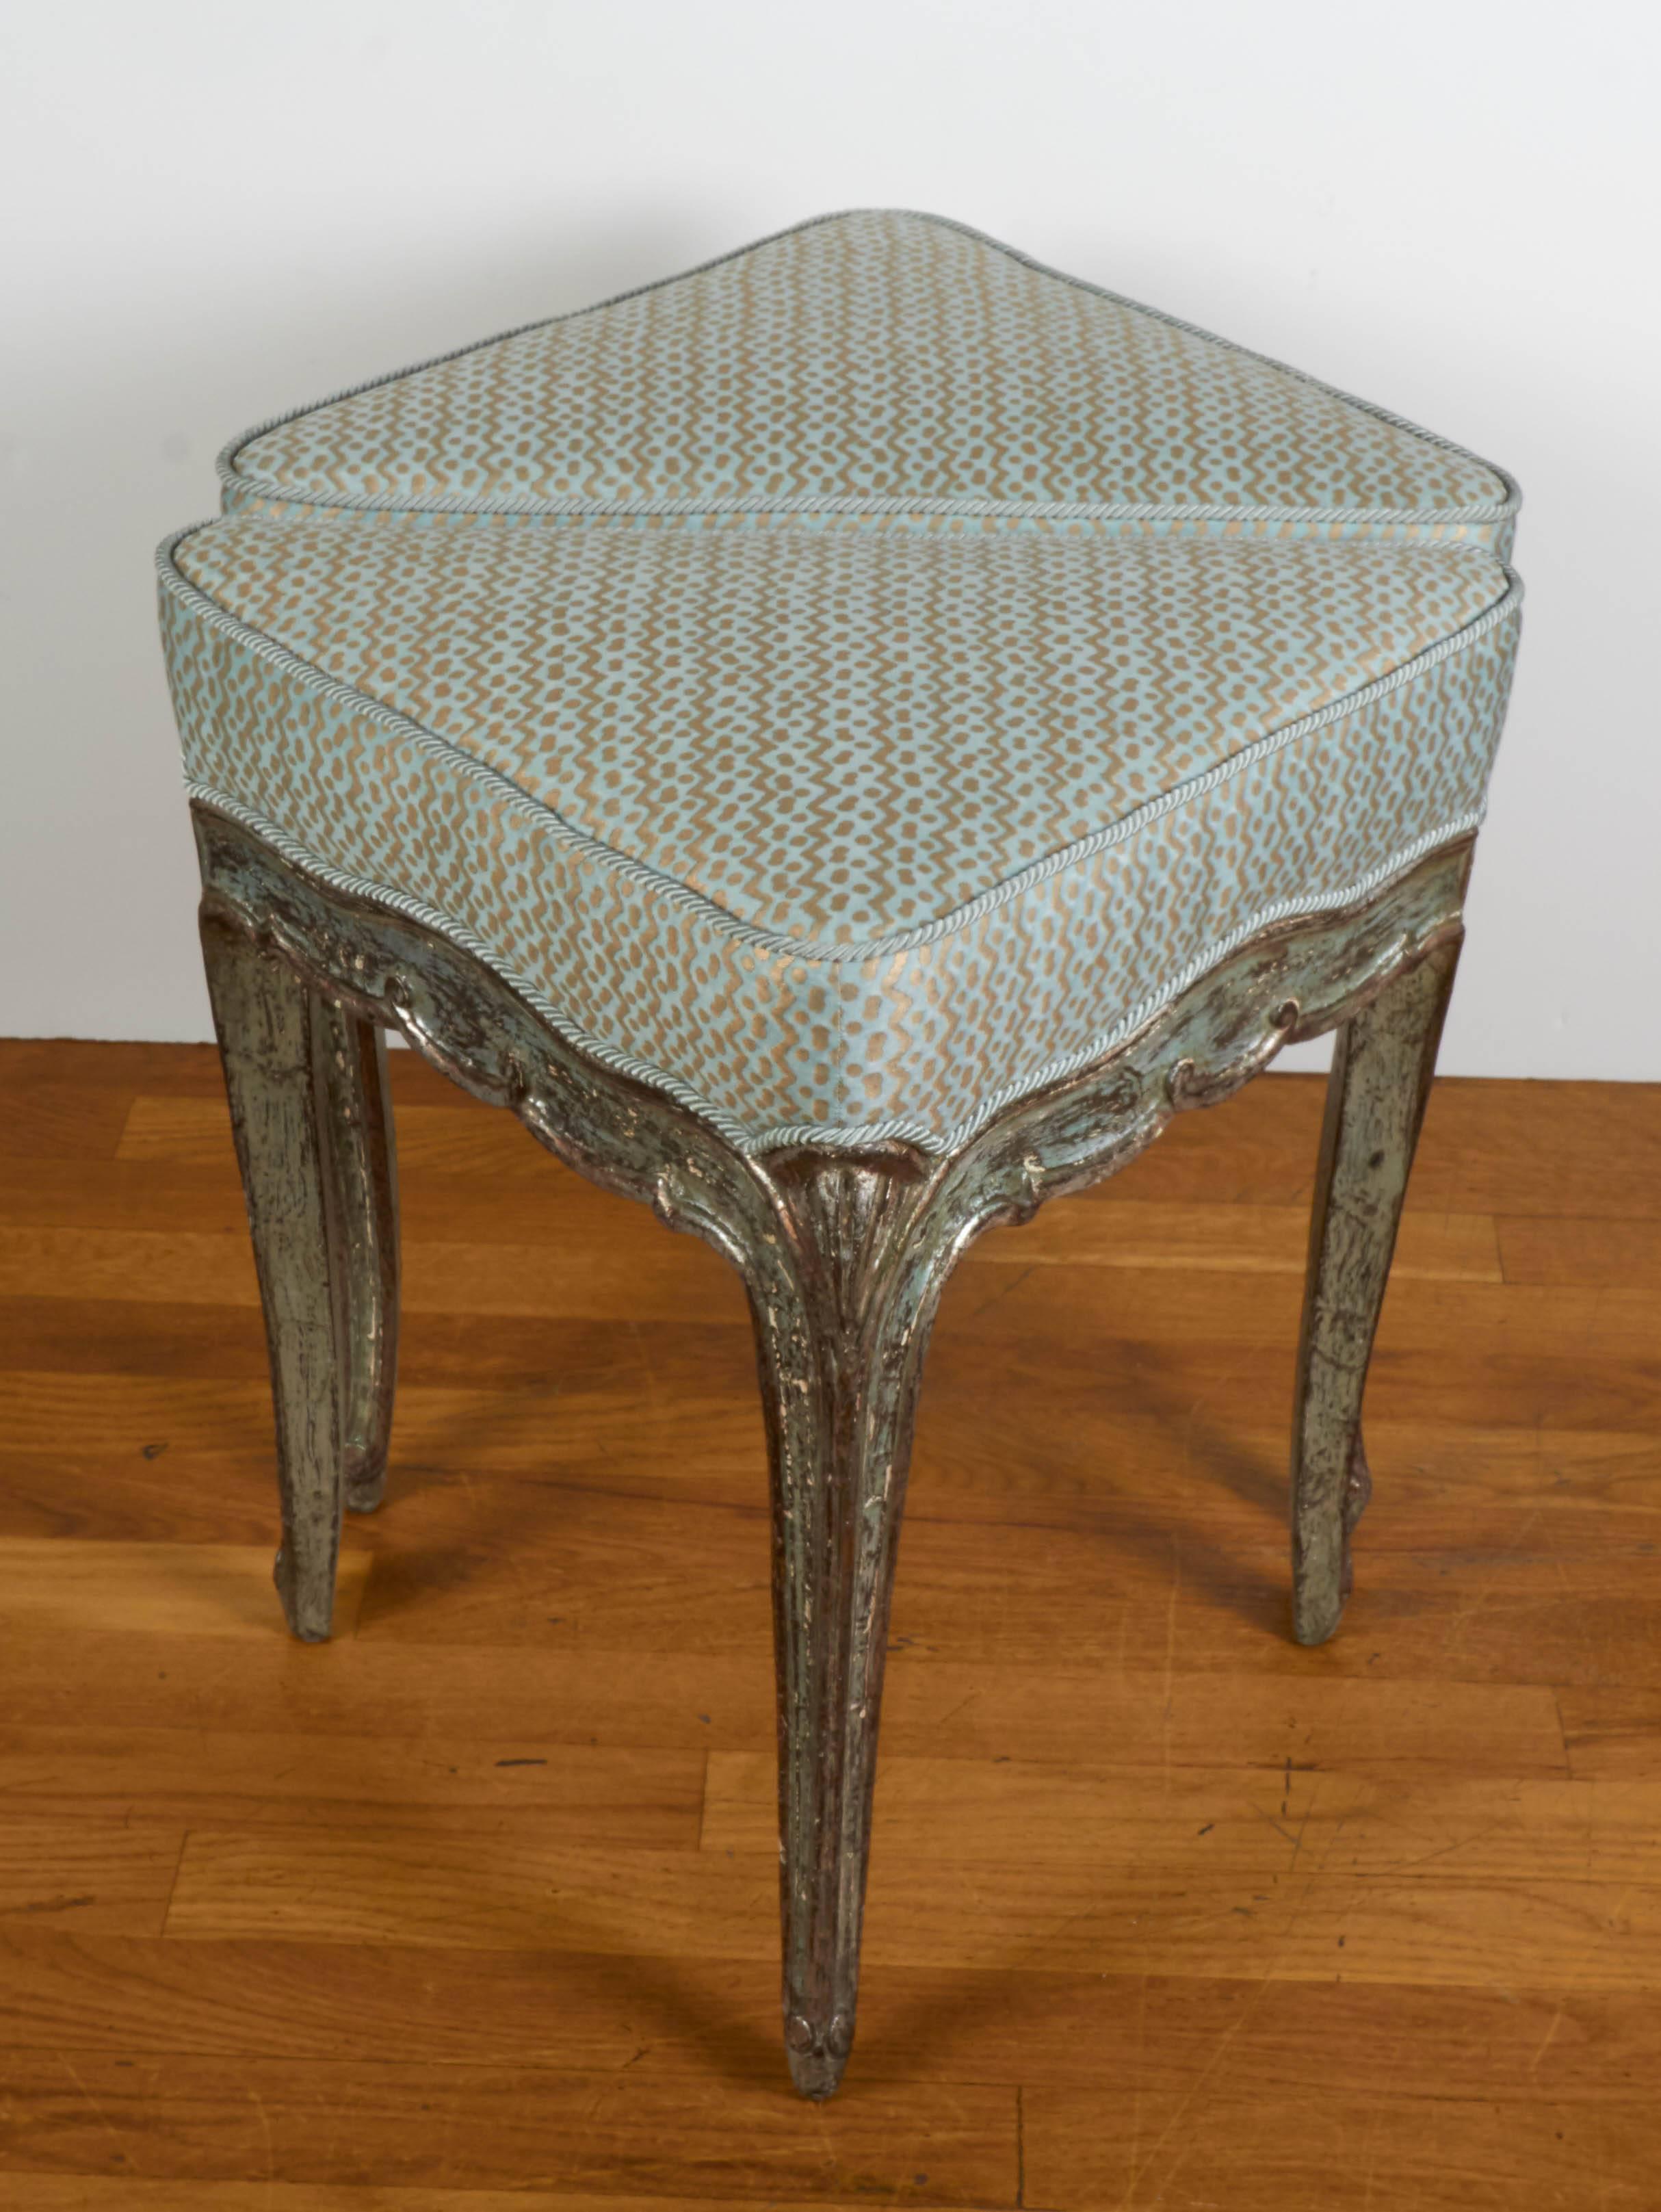 A pair of Italian Rococo style silver leaf benches, triangle form with delicate shell carved knees on cabriole leg, newly upholstered in aquamarine and silver Fortuny fabric in the Tapa pattern